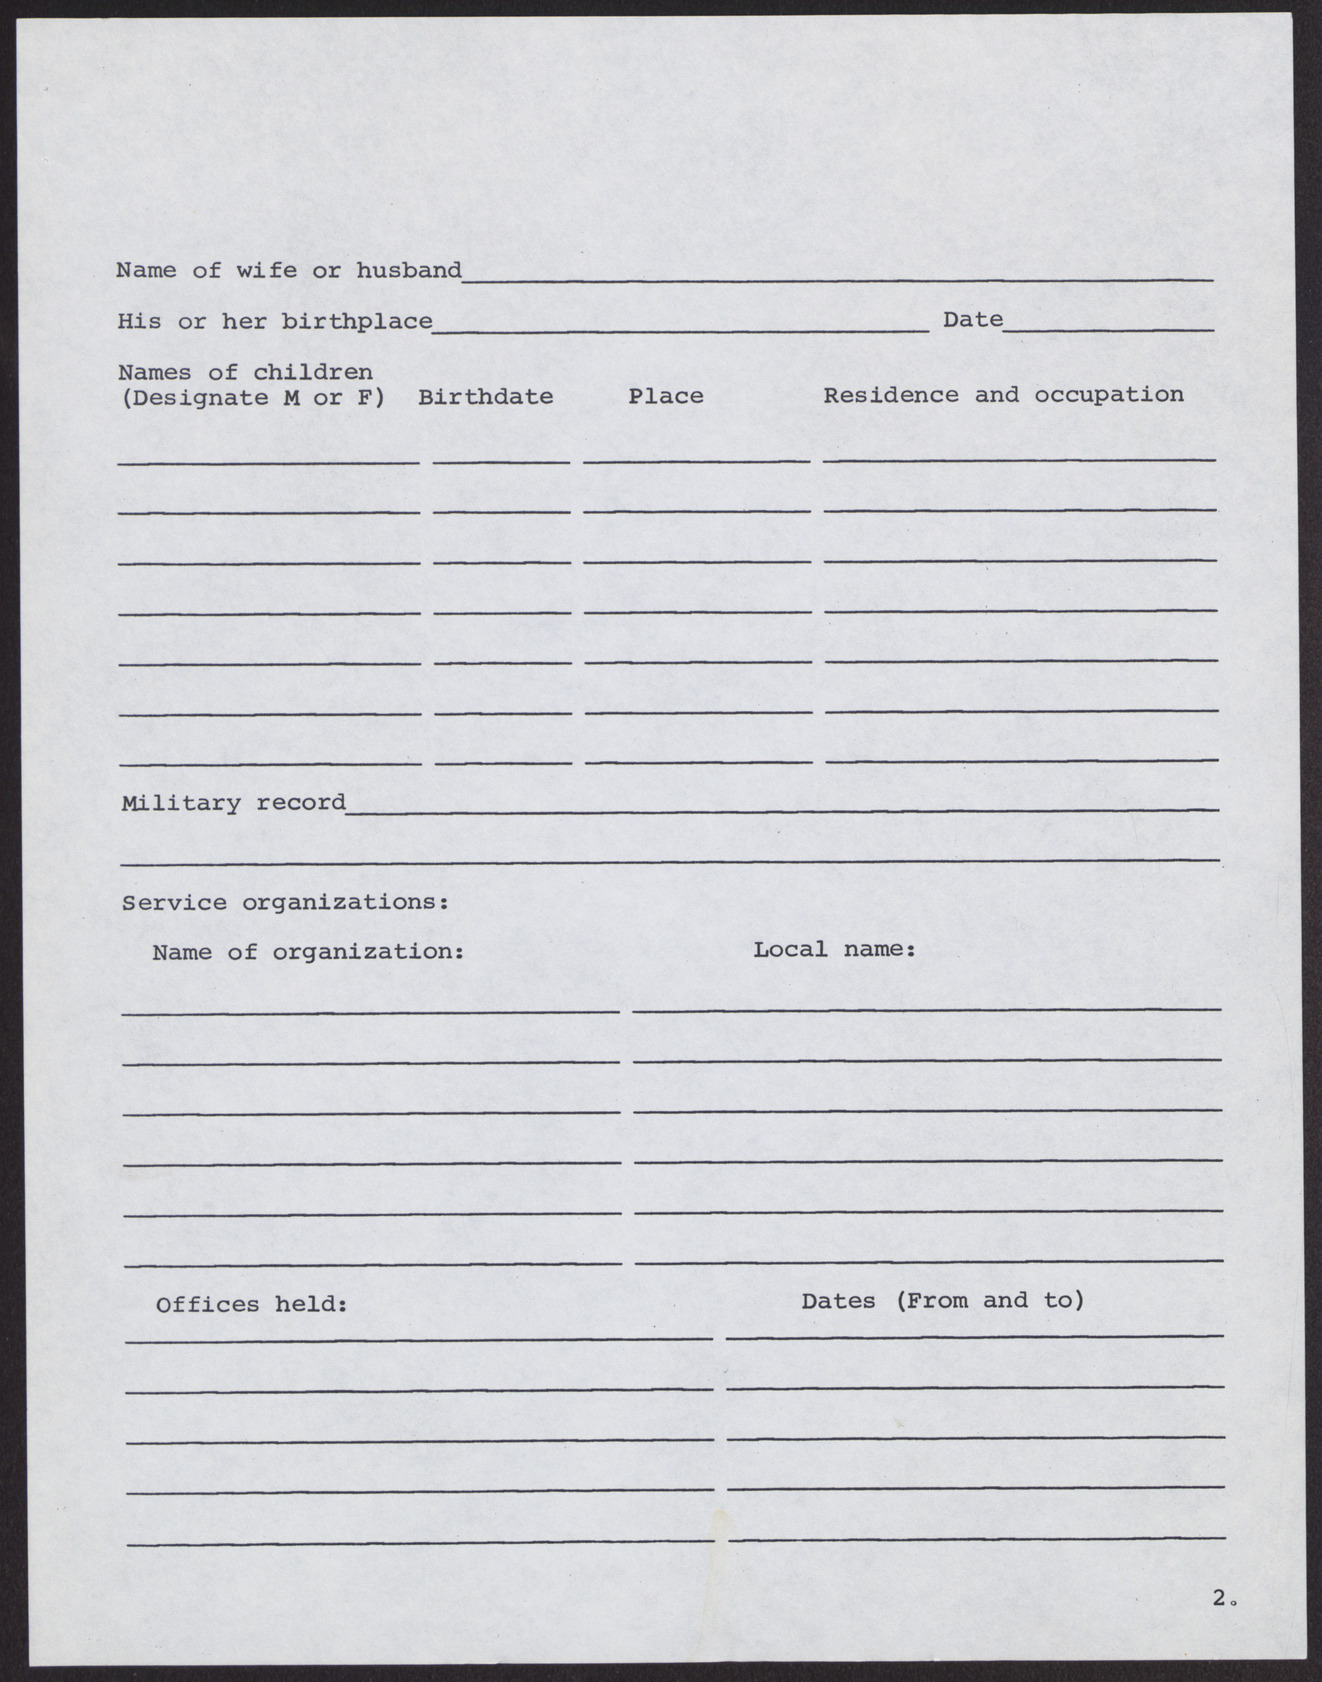 Blank biography questionnaire, no date, page 2